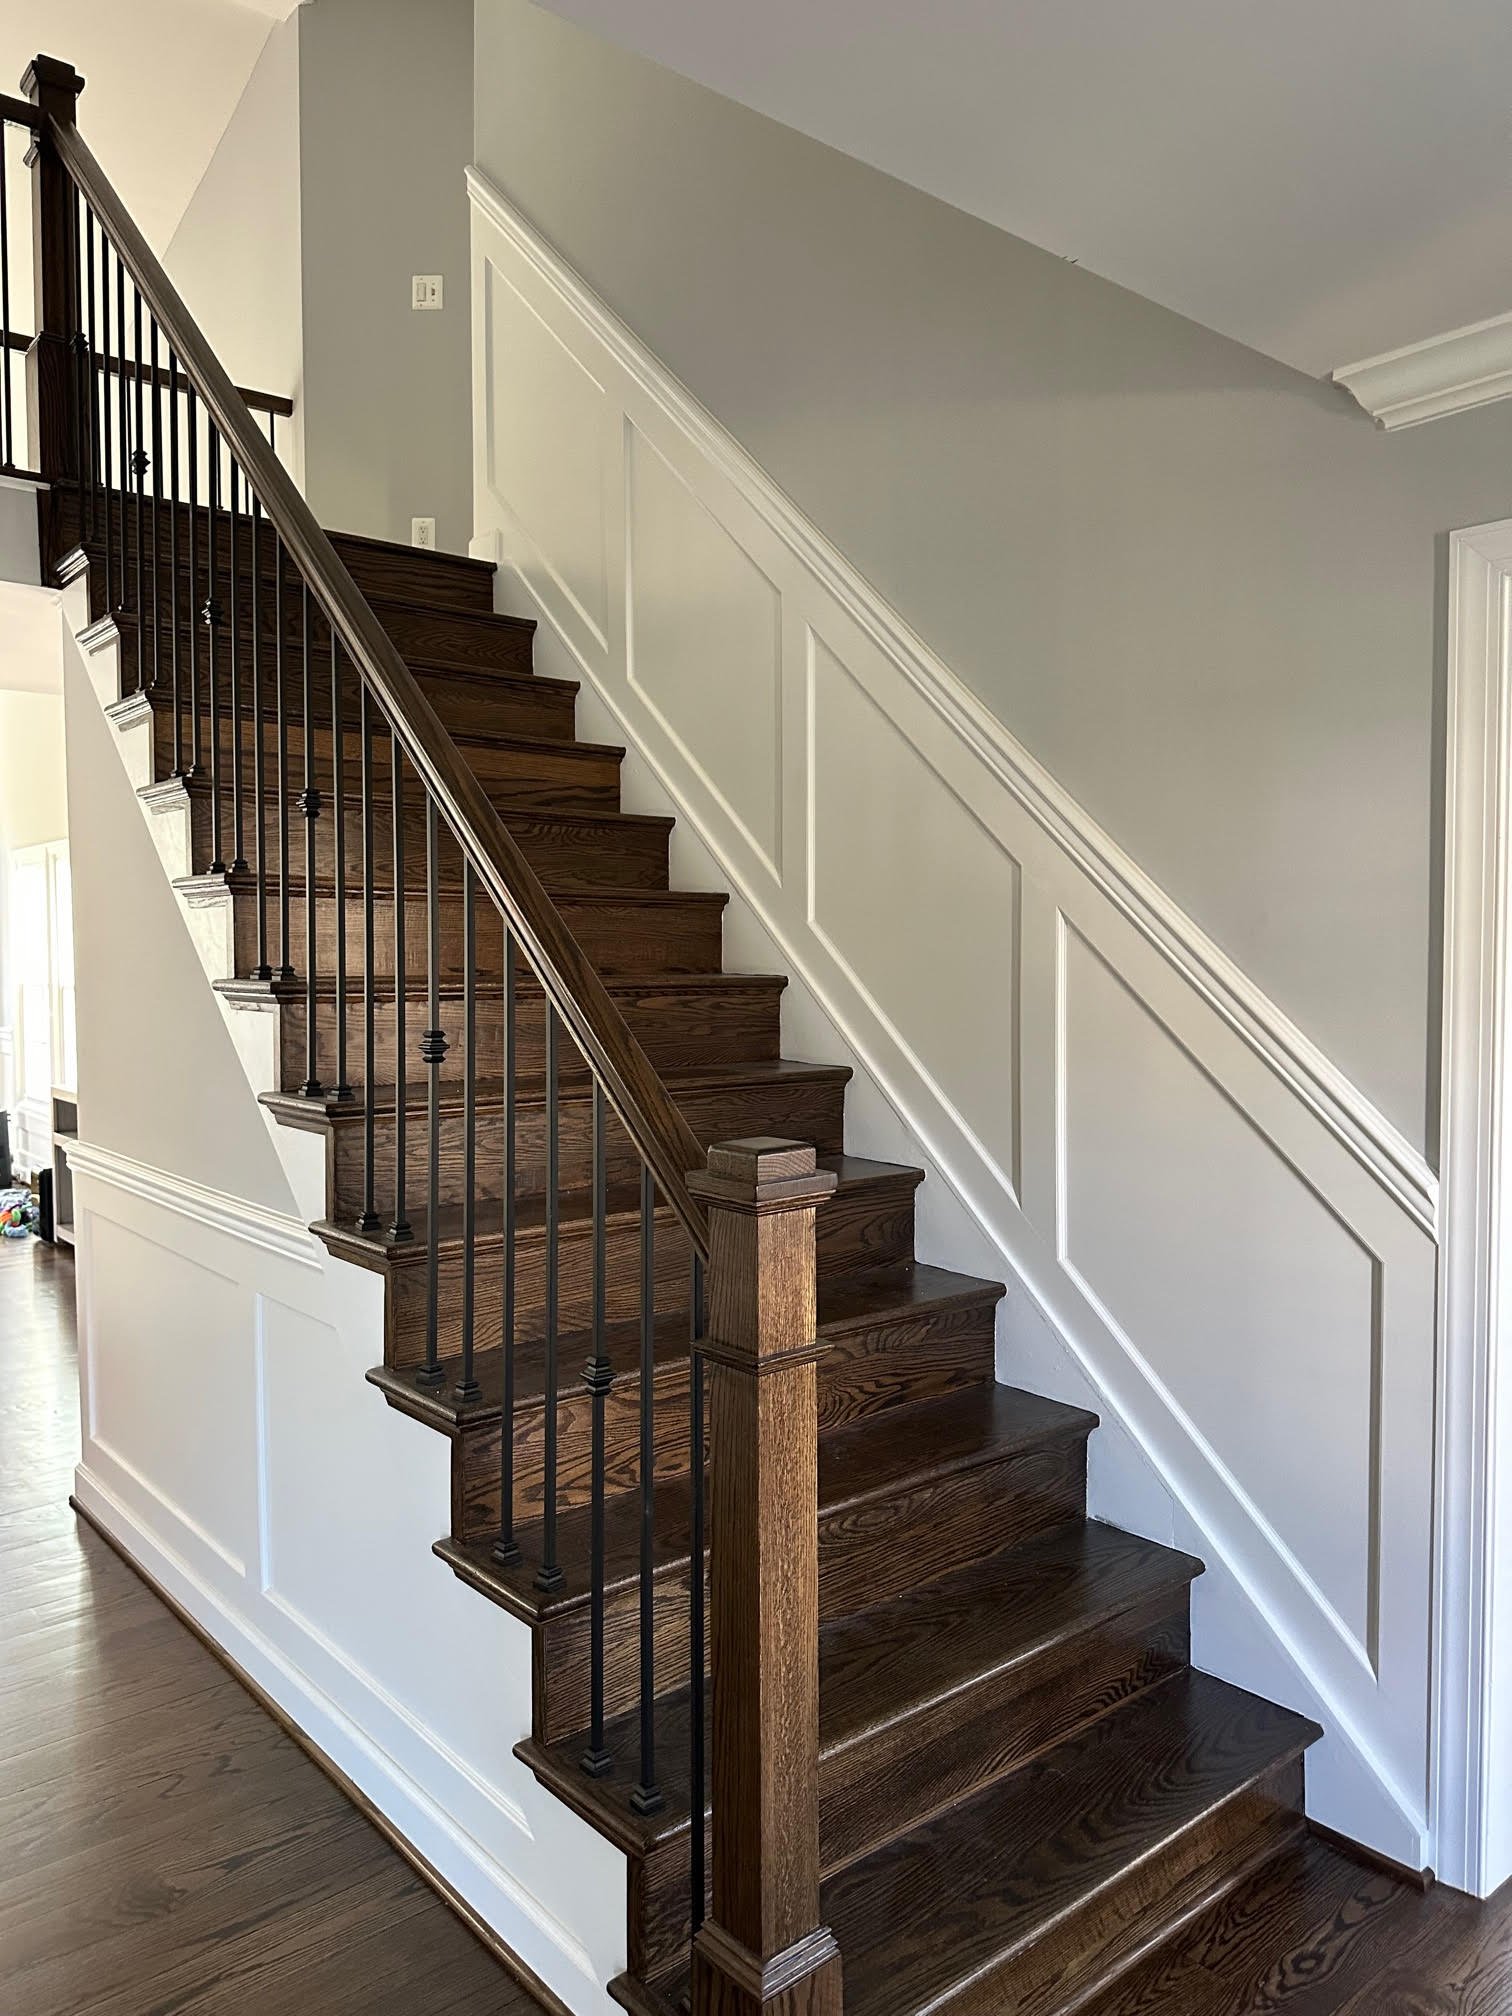 Chantilly Molding ans Staircase Remodel.jpg